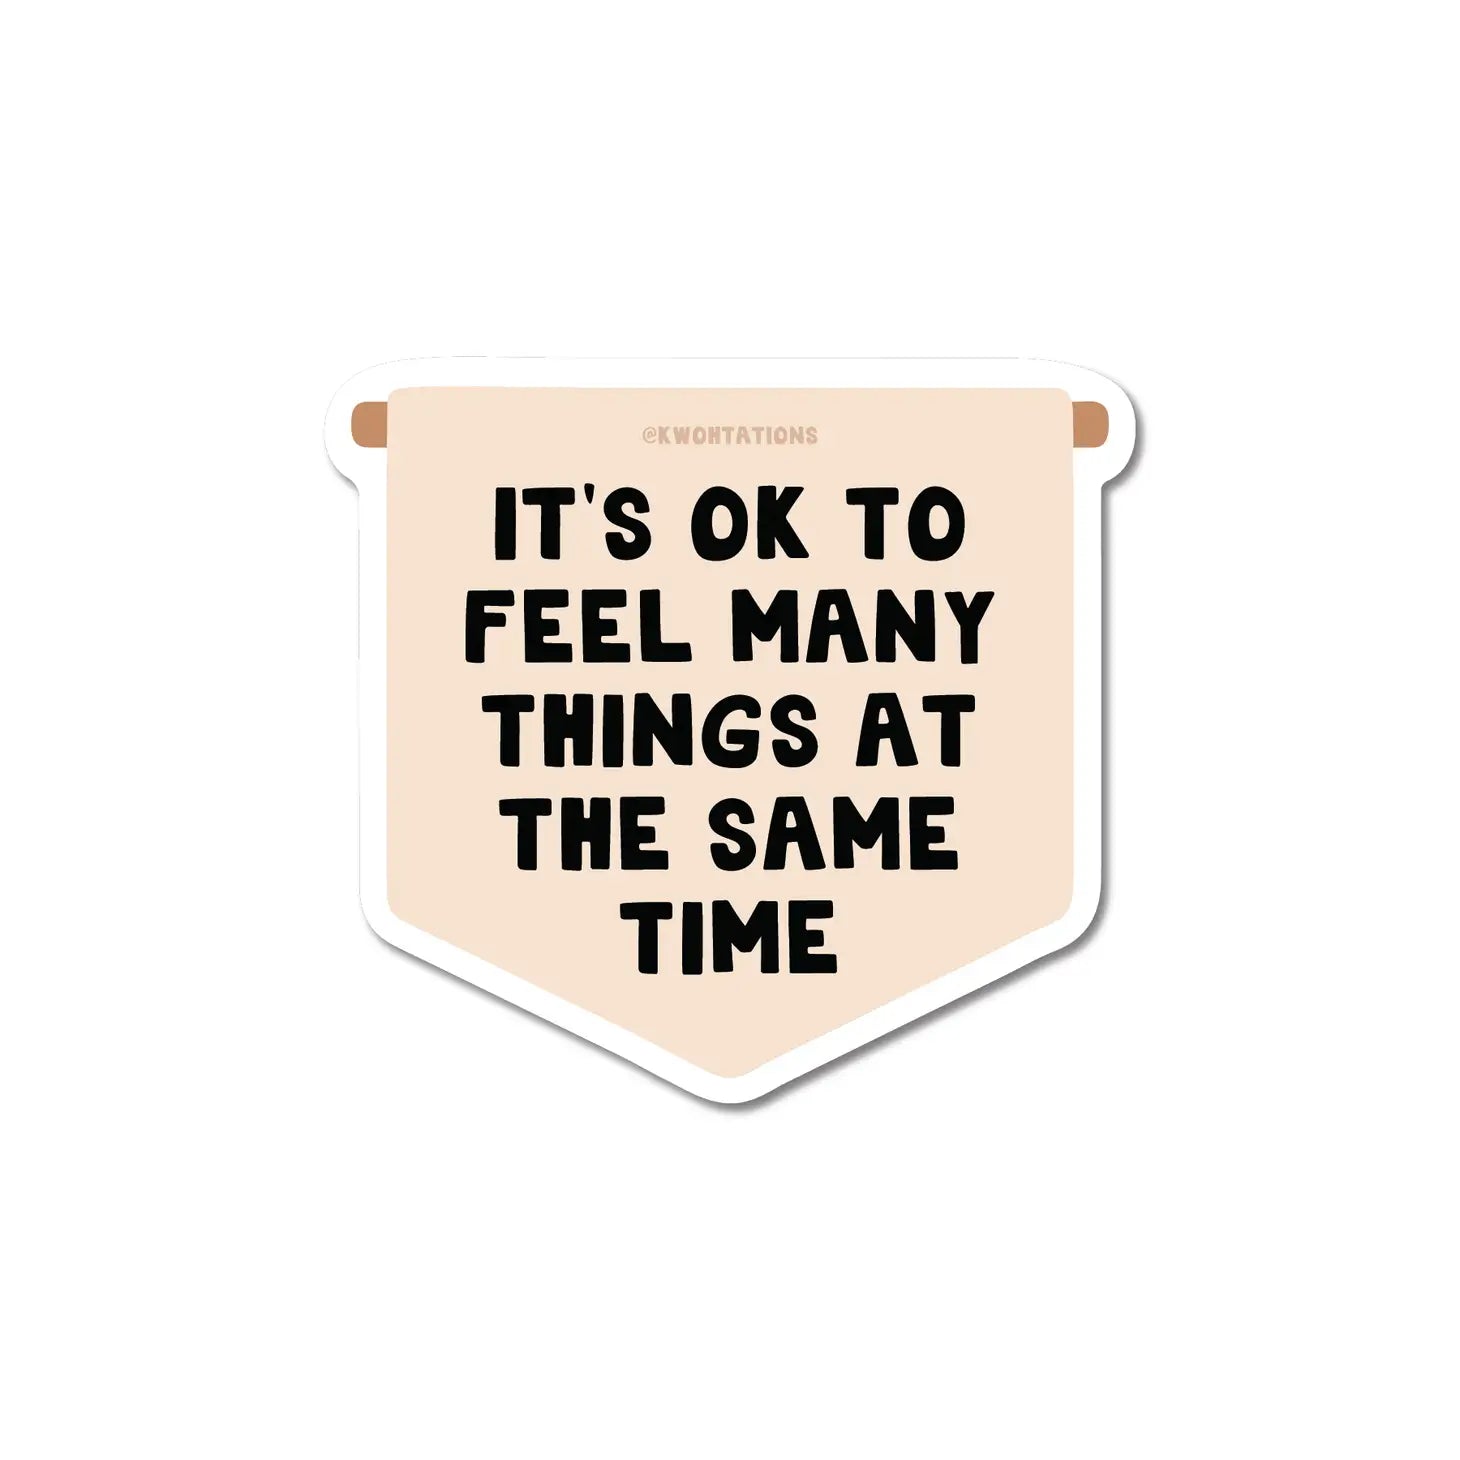 Vertical flag-shaped sticker with tan background. Black text reads "It's ok to feel many things at the same time"